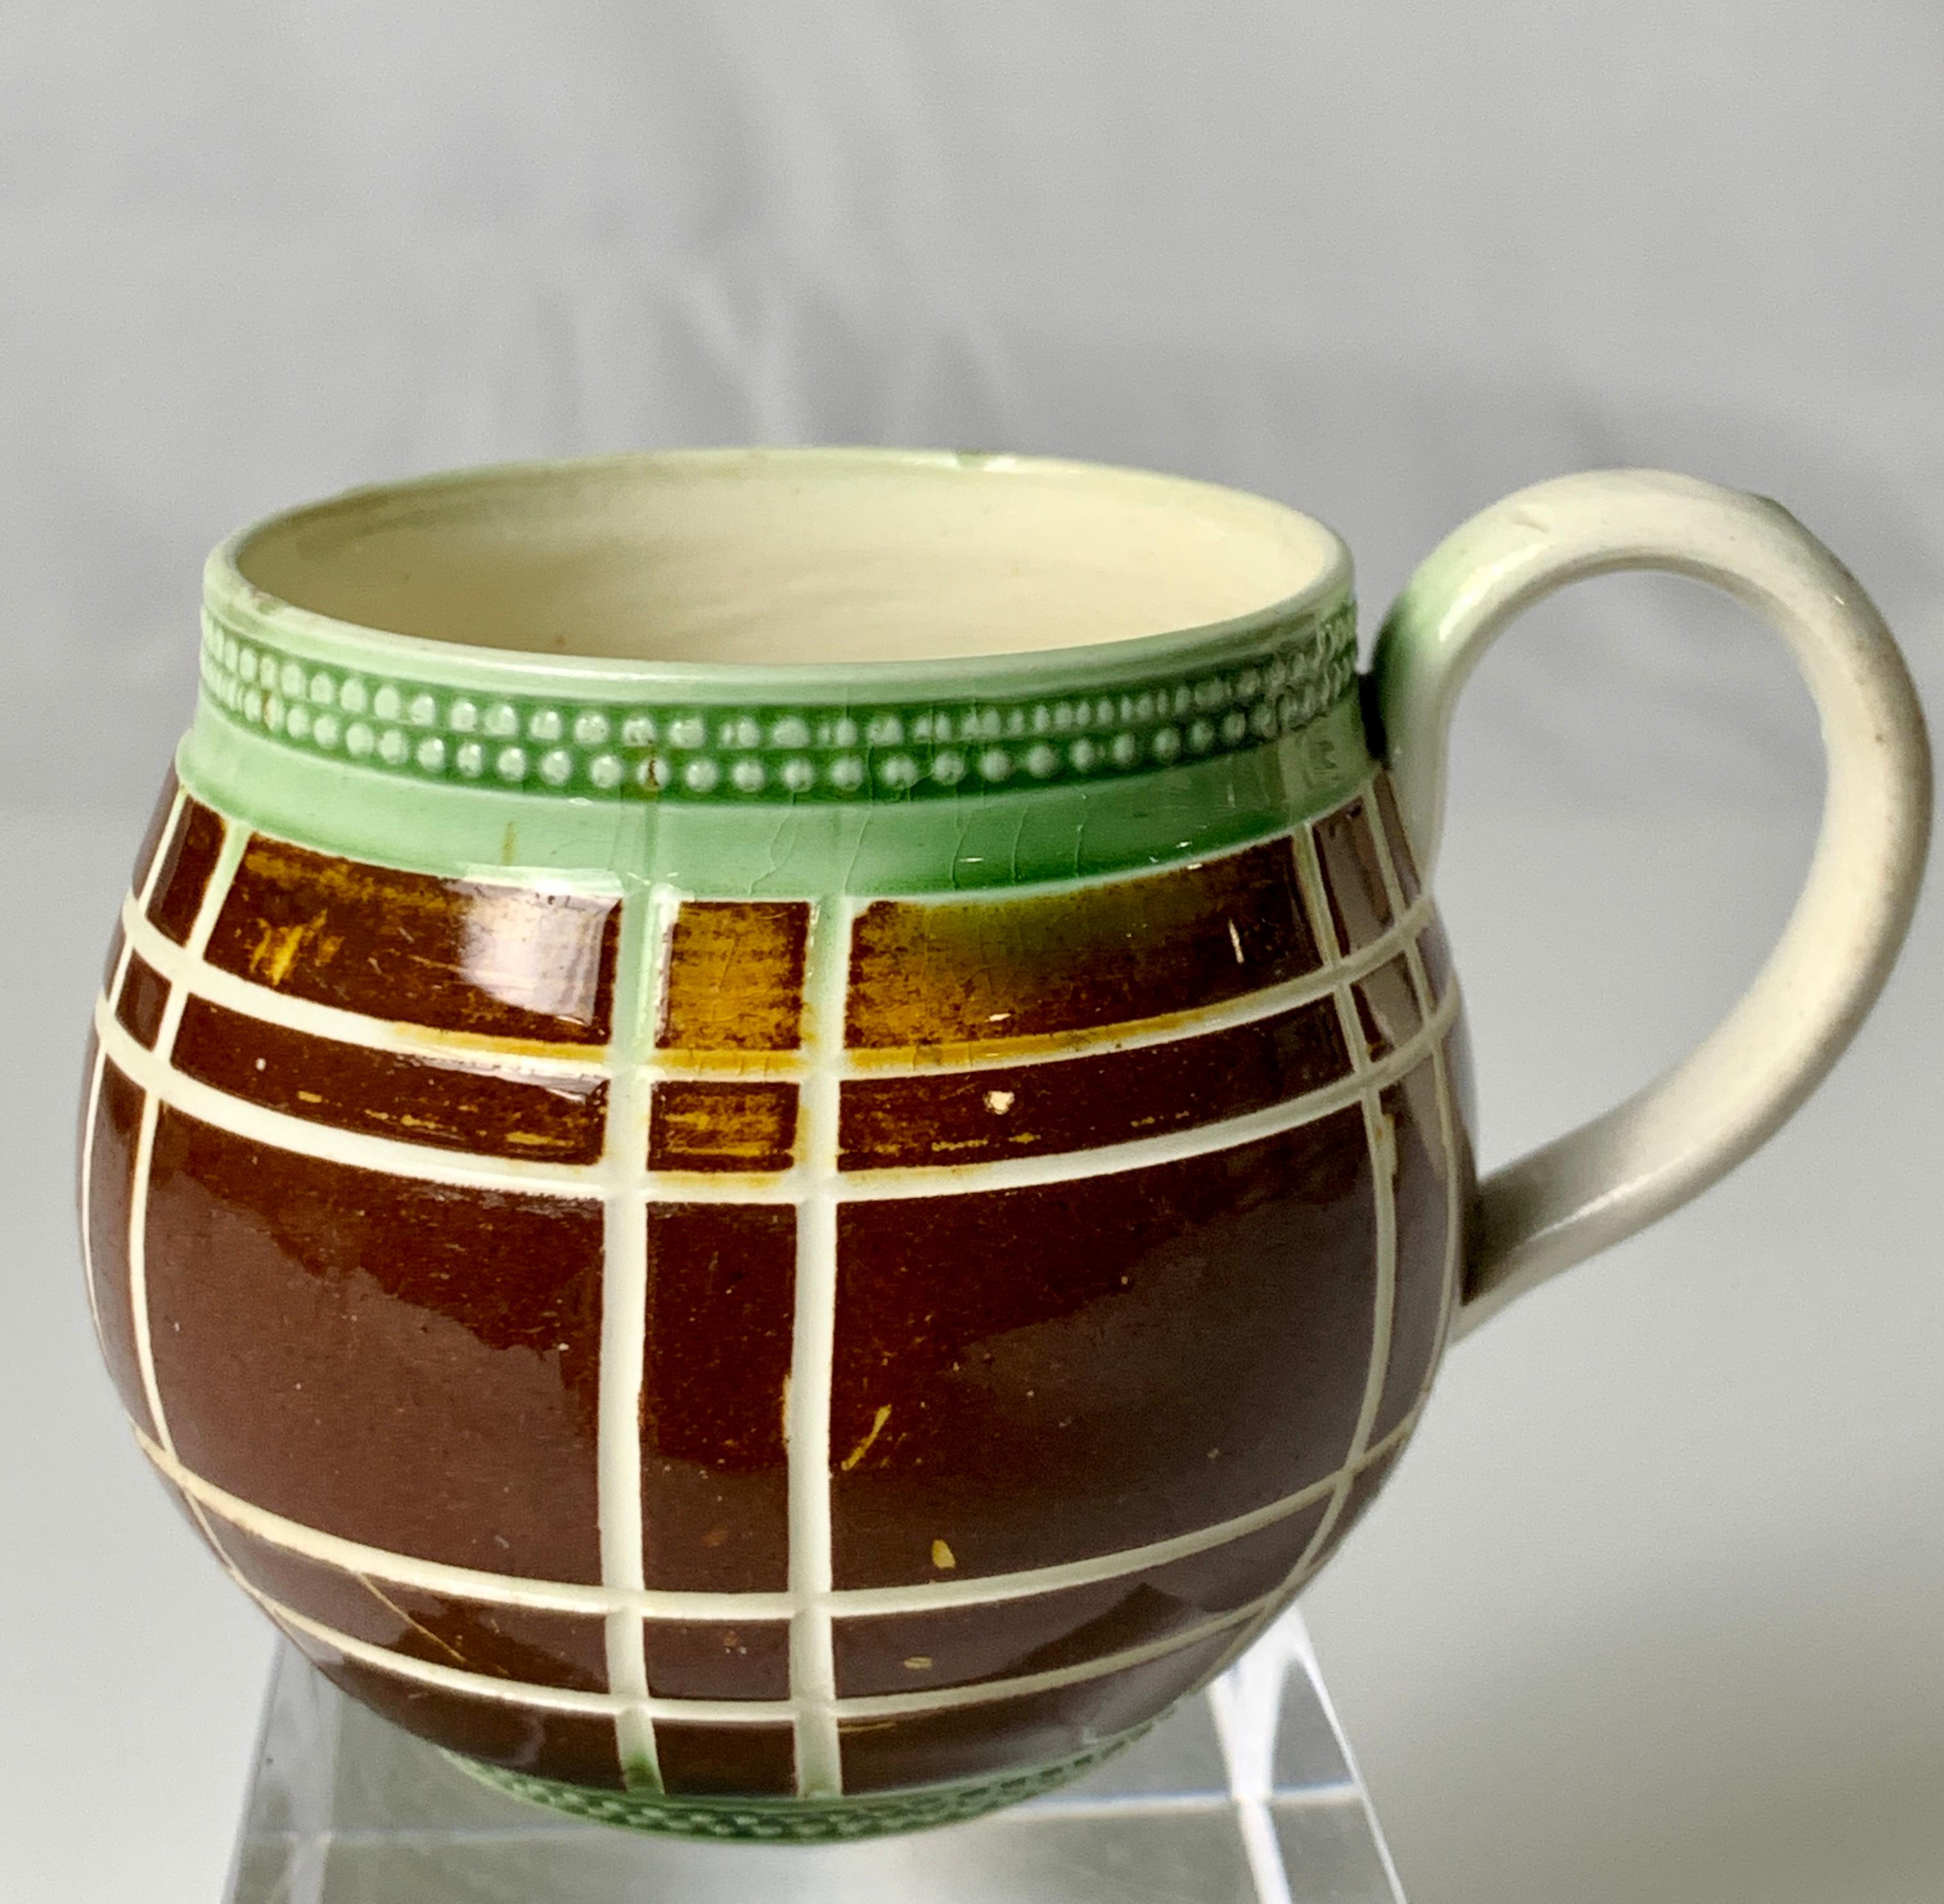 This rare Mochaware cup is a gem.
 It is a rare shape for a piece of Mochaware as it is neither a pitcher, a mug, nor a bowl. 
 The main body is decorated with brown slip and further decorated with rare vertical and horizontal engine-turned stripes